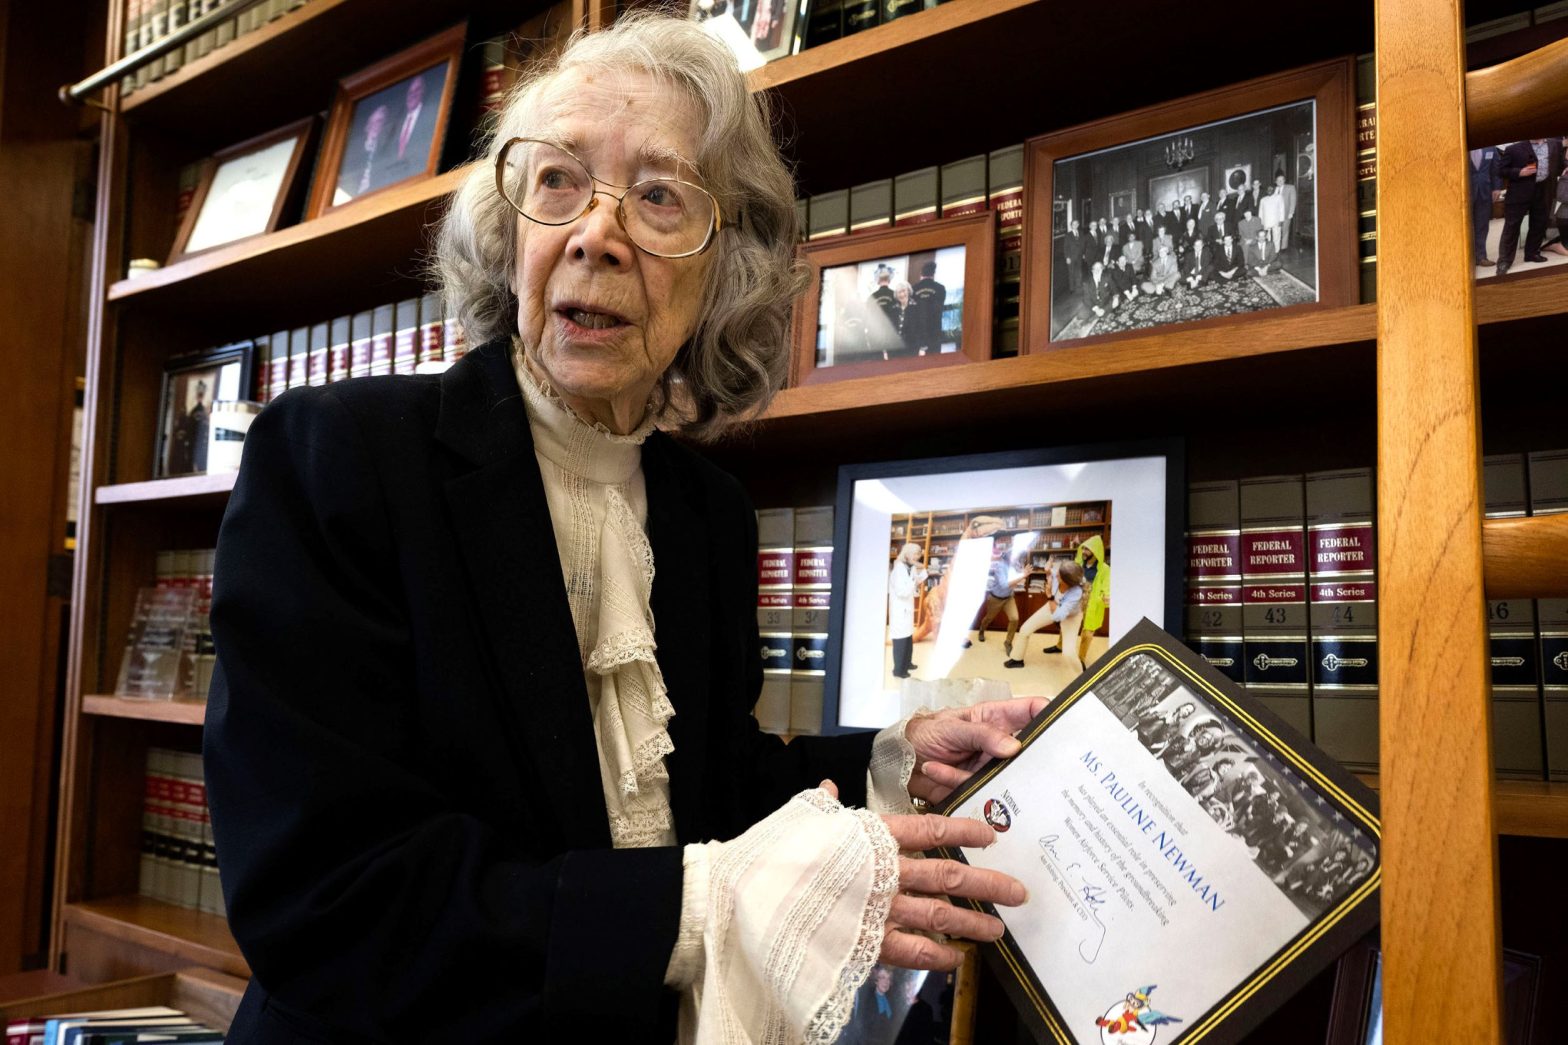 Federal Judges Suspend 96-Year-Old Colleague They Say Shows Mental Decline